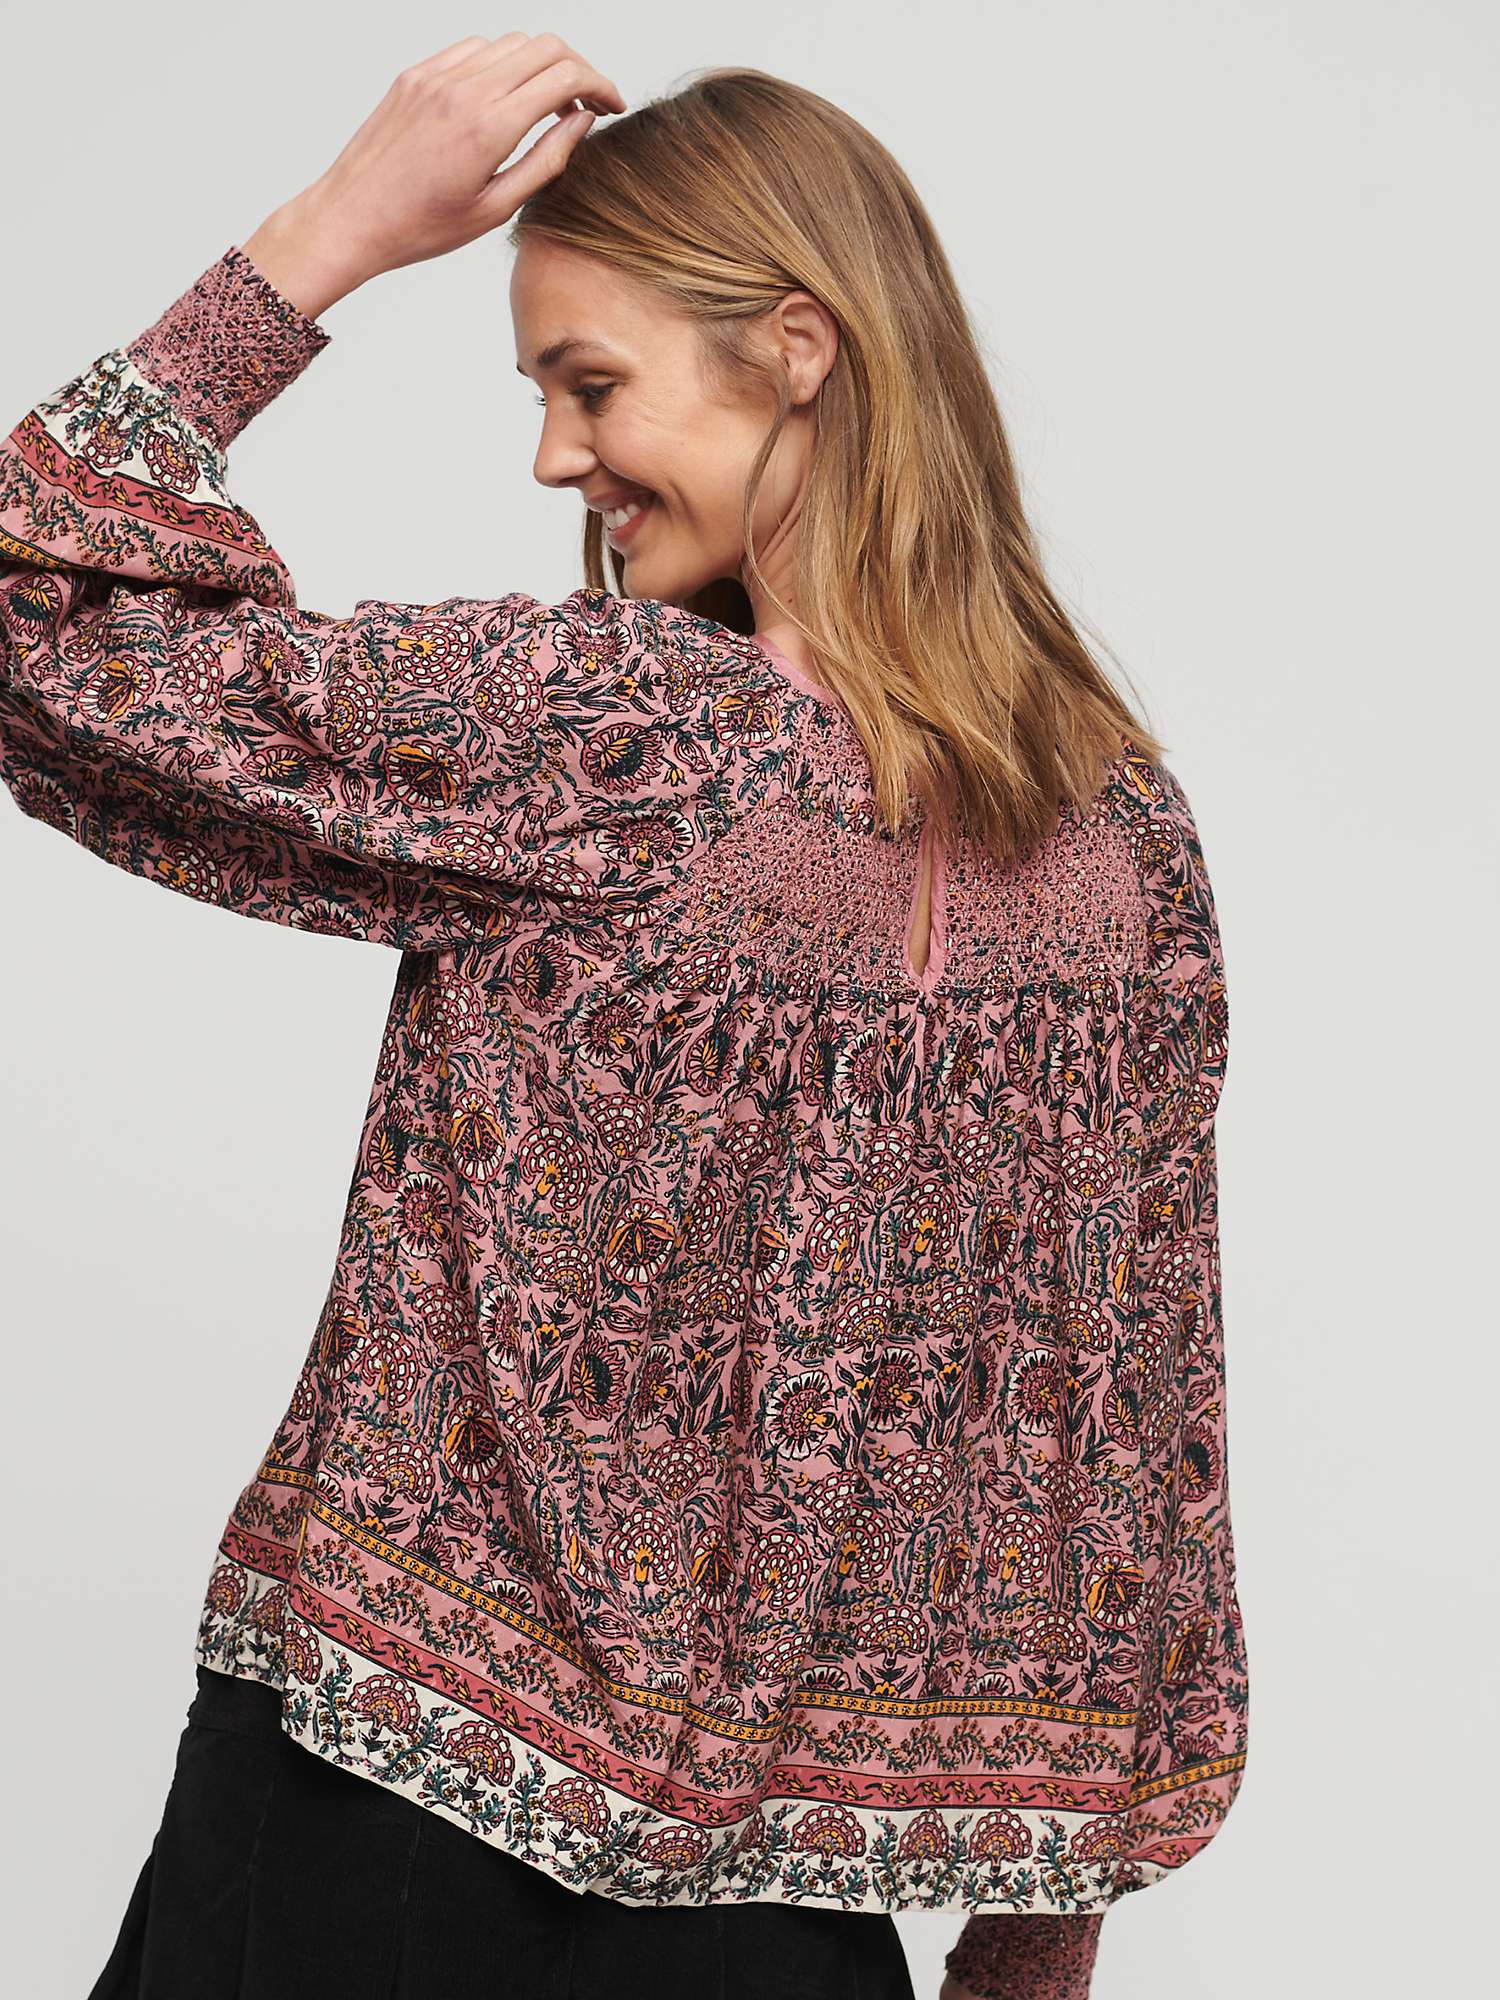 Buy Superdry Printed Smocked Woven Top, French Floral Peach Online at johnlewis.com